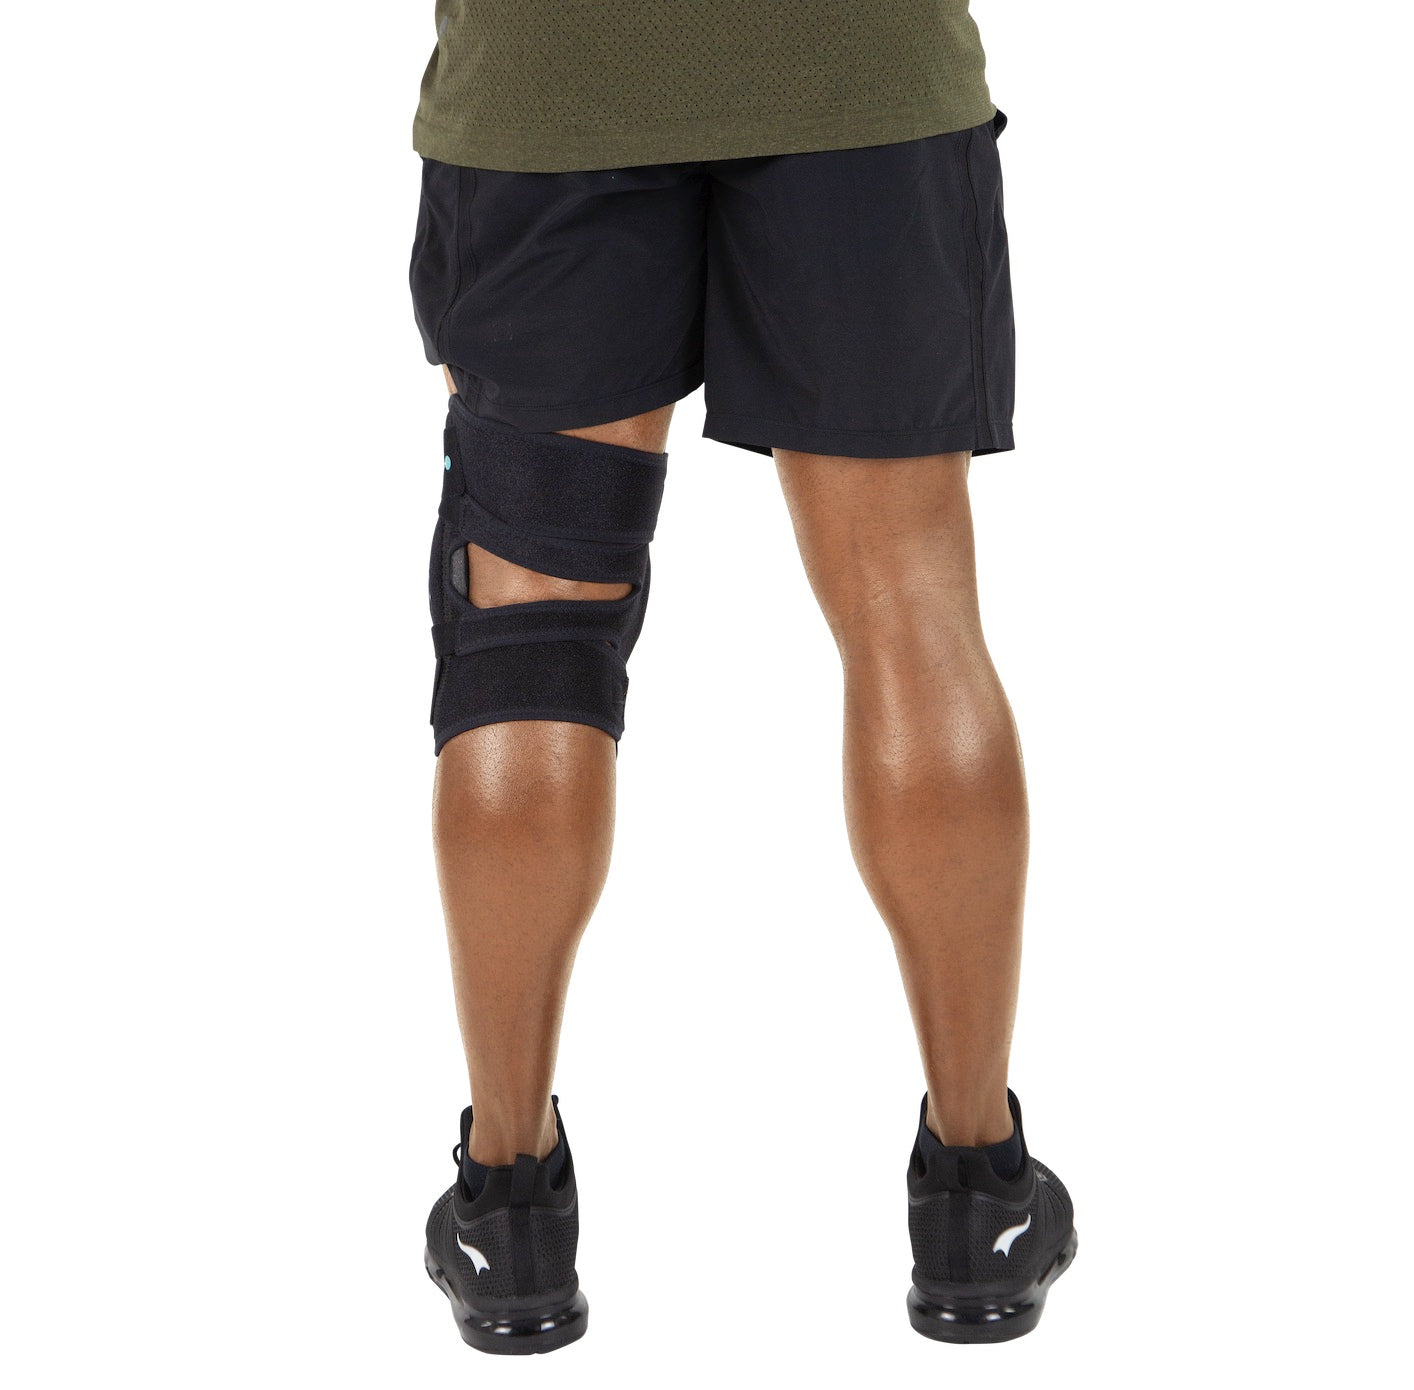 Hinged Knee Brace Coretech – Americare Medical Supplies & Services